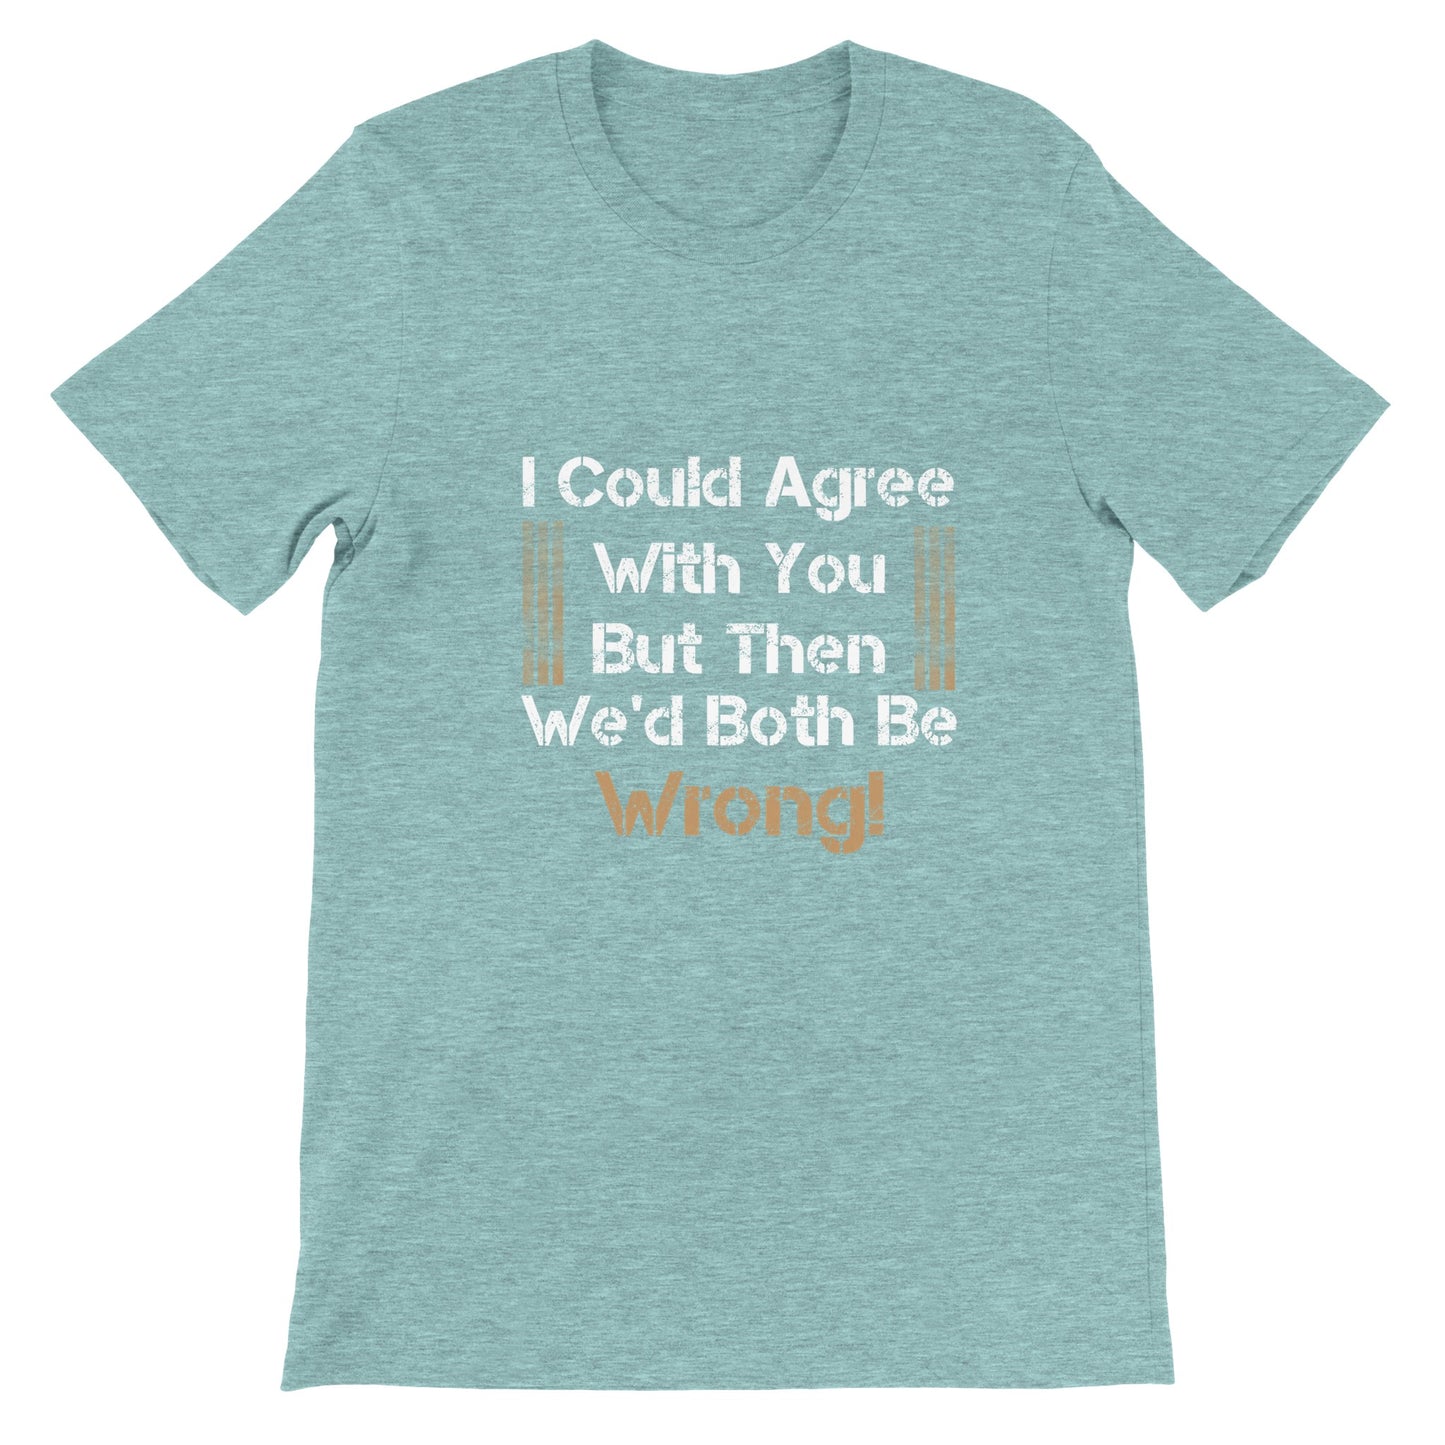 Budget Unisex Crewneck T-shirt/I-Could-Agree-With-You